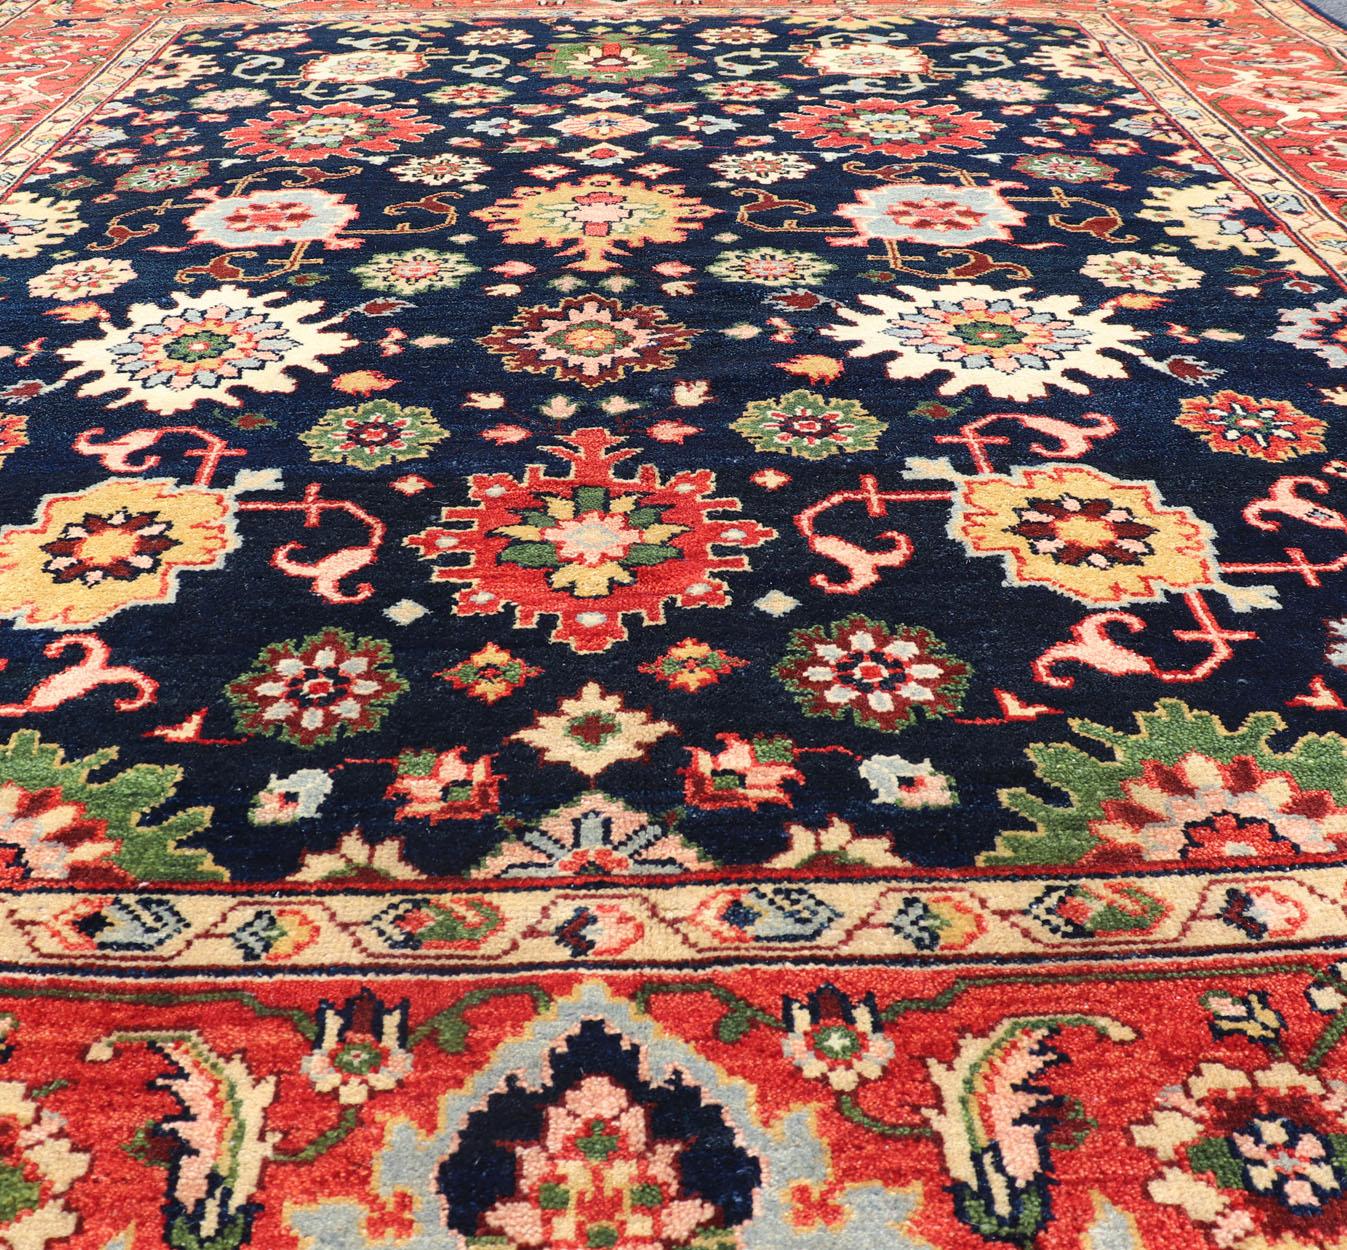 Keivan Woven Arts Sultanabad-Mahal Design in All-Over Floral Hand-Knotted Carpet. 

Measures: 8' x 10' 

Beautiful modern Mahal-Sultanabad hand-knotted wool rug with a Traditional Design. This Mahal-Sultanabad rug has a multi-color accent in a